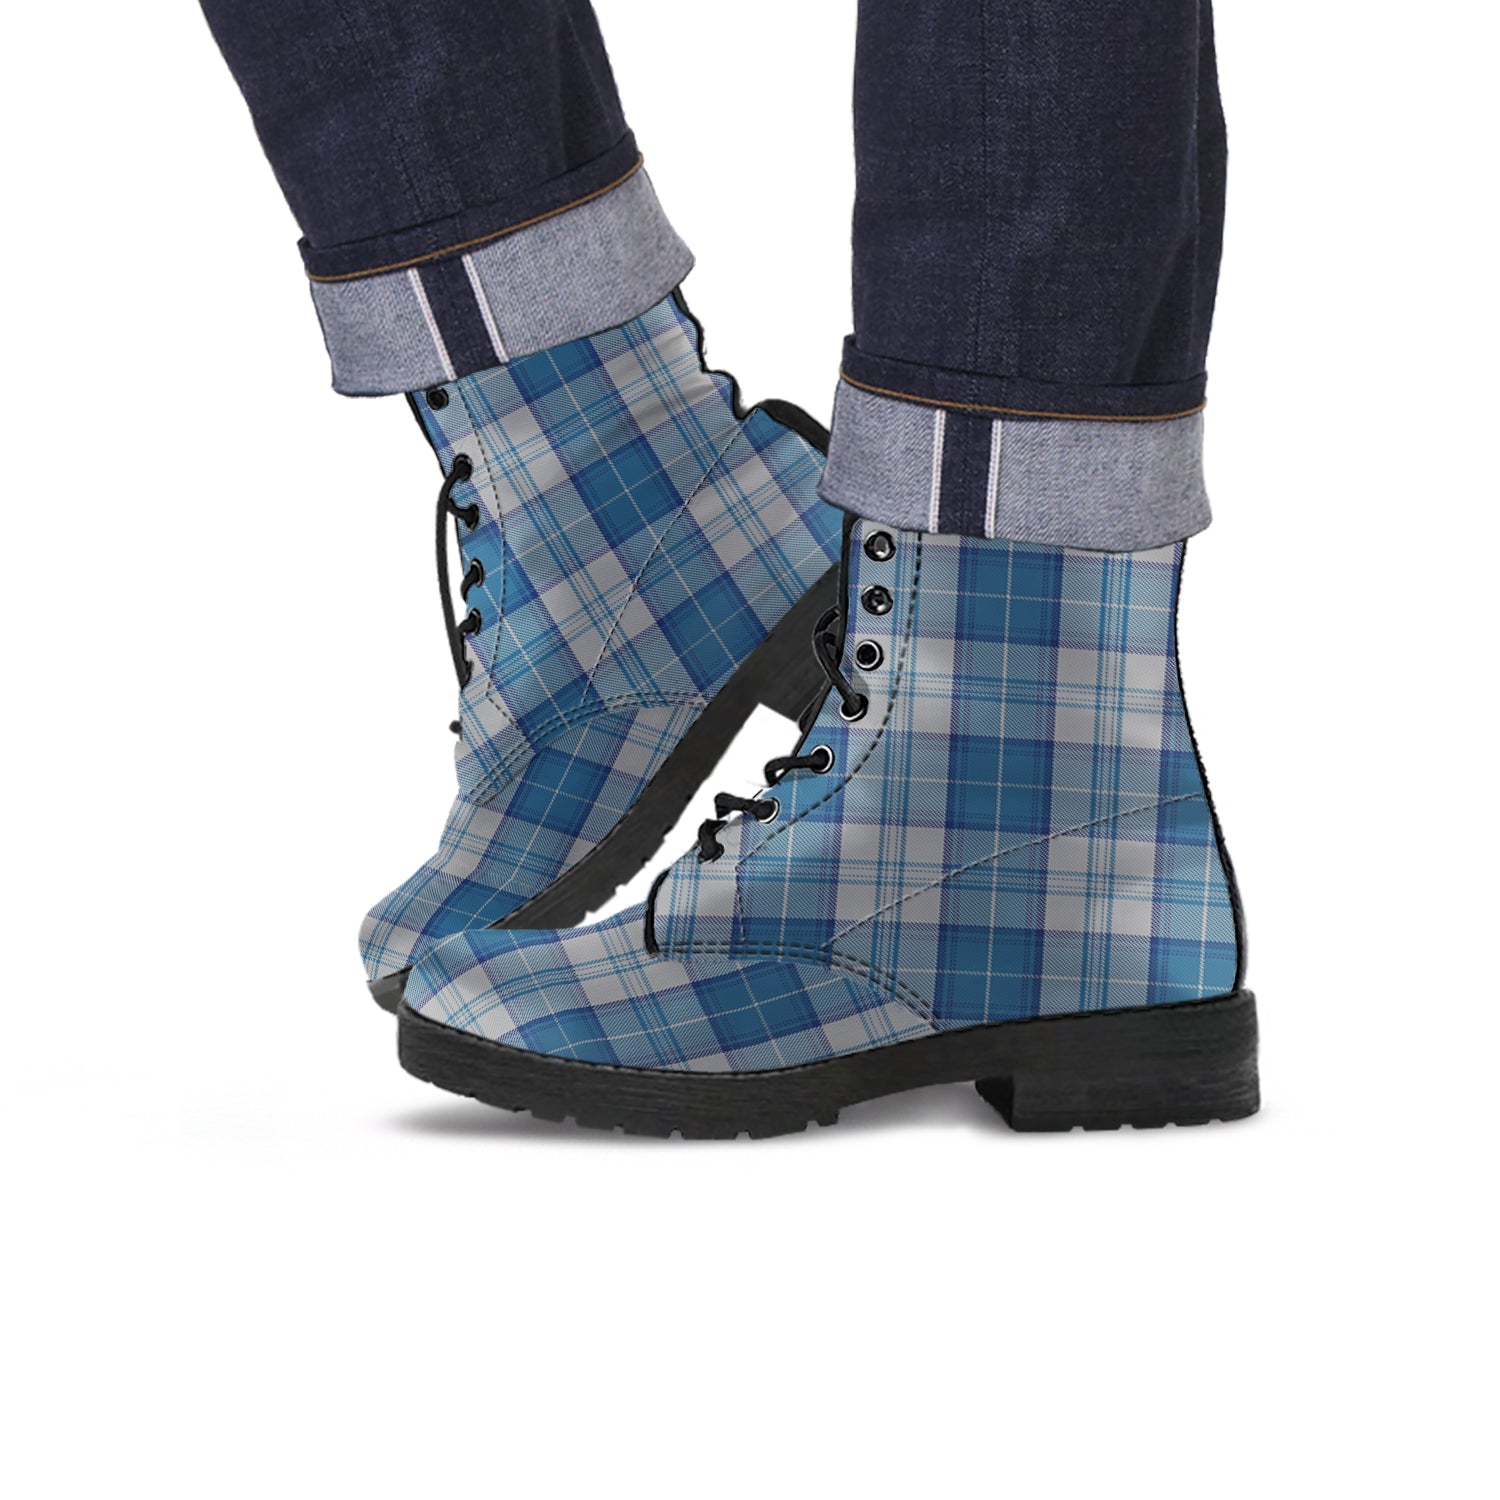 menzies-dress-blue-and-white-tartan-leather-boots